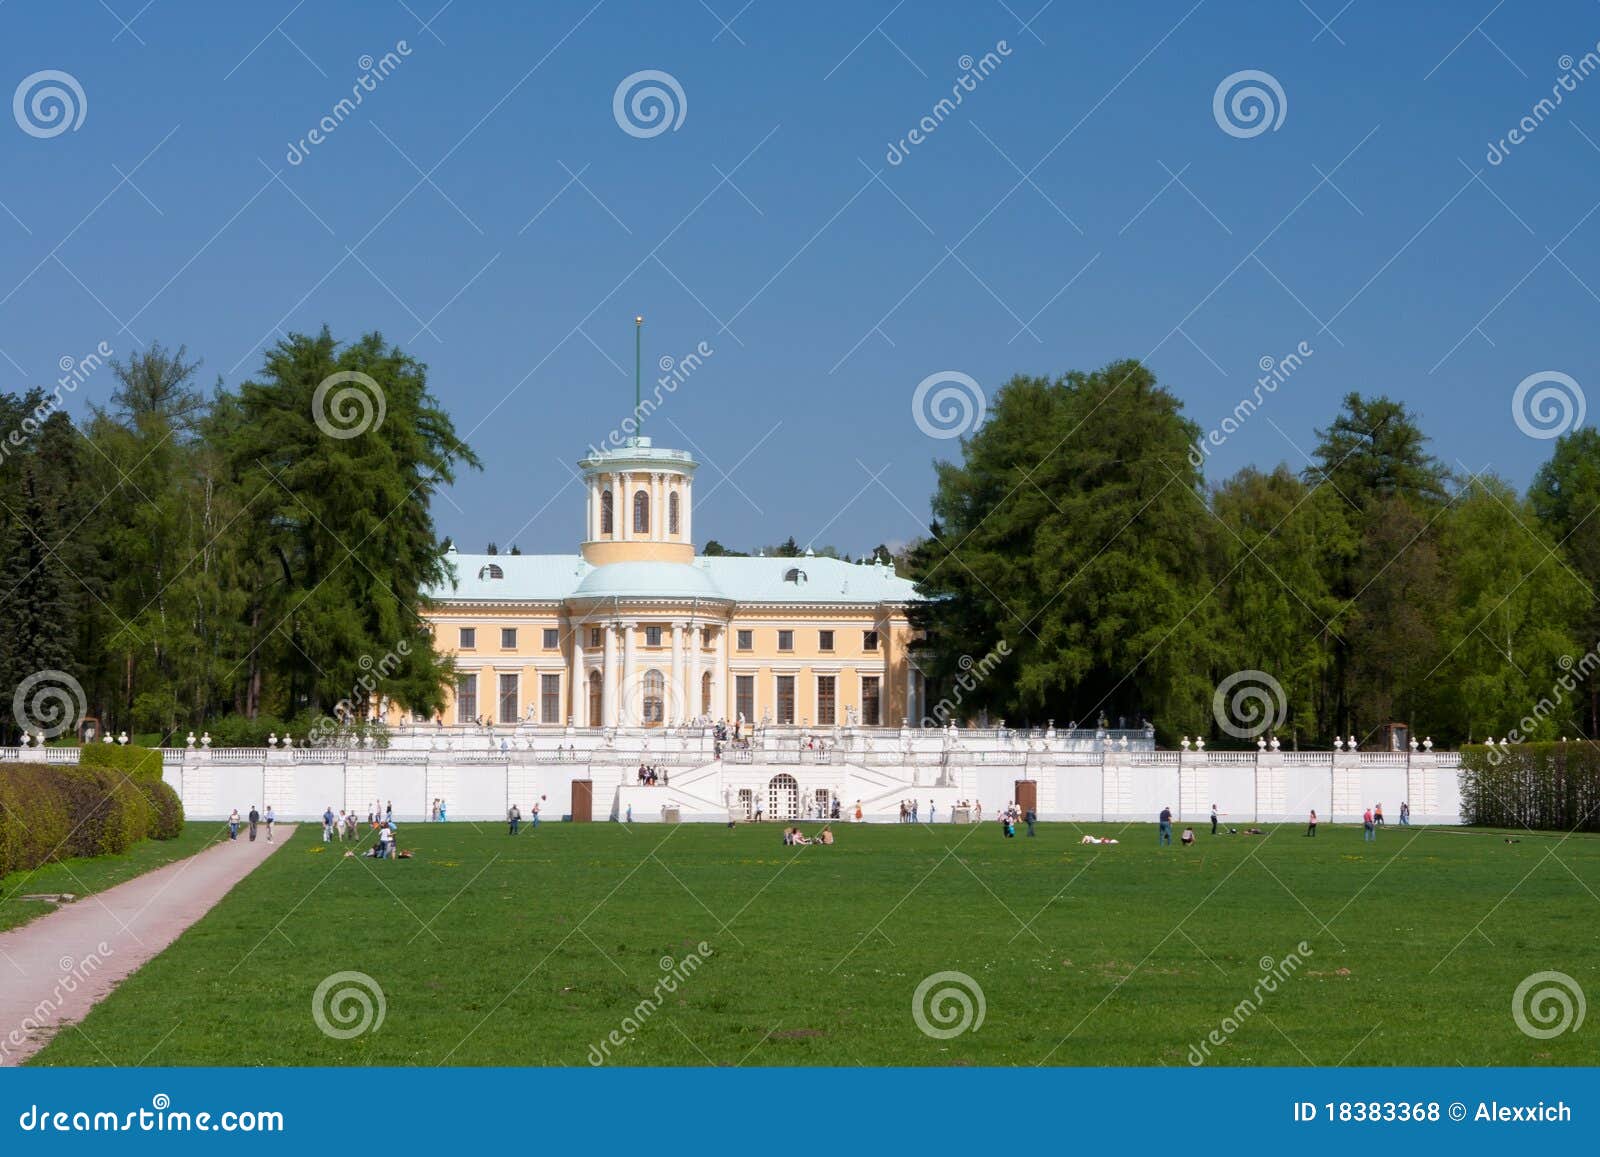 Palace in Arkhangelskoye Estate Stock Photo - Image of classical, cloud ...